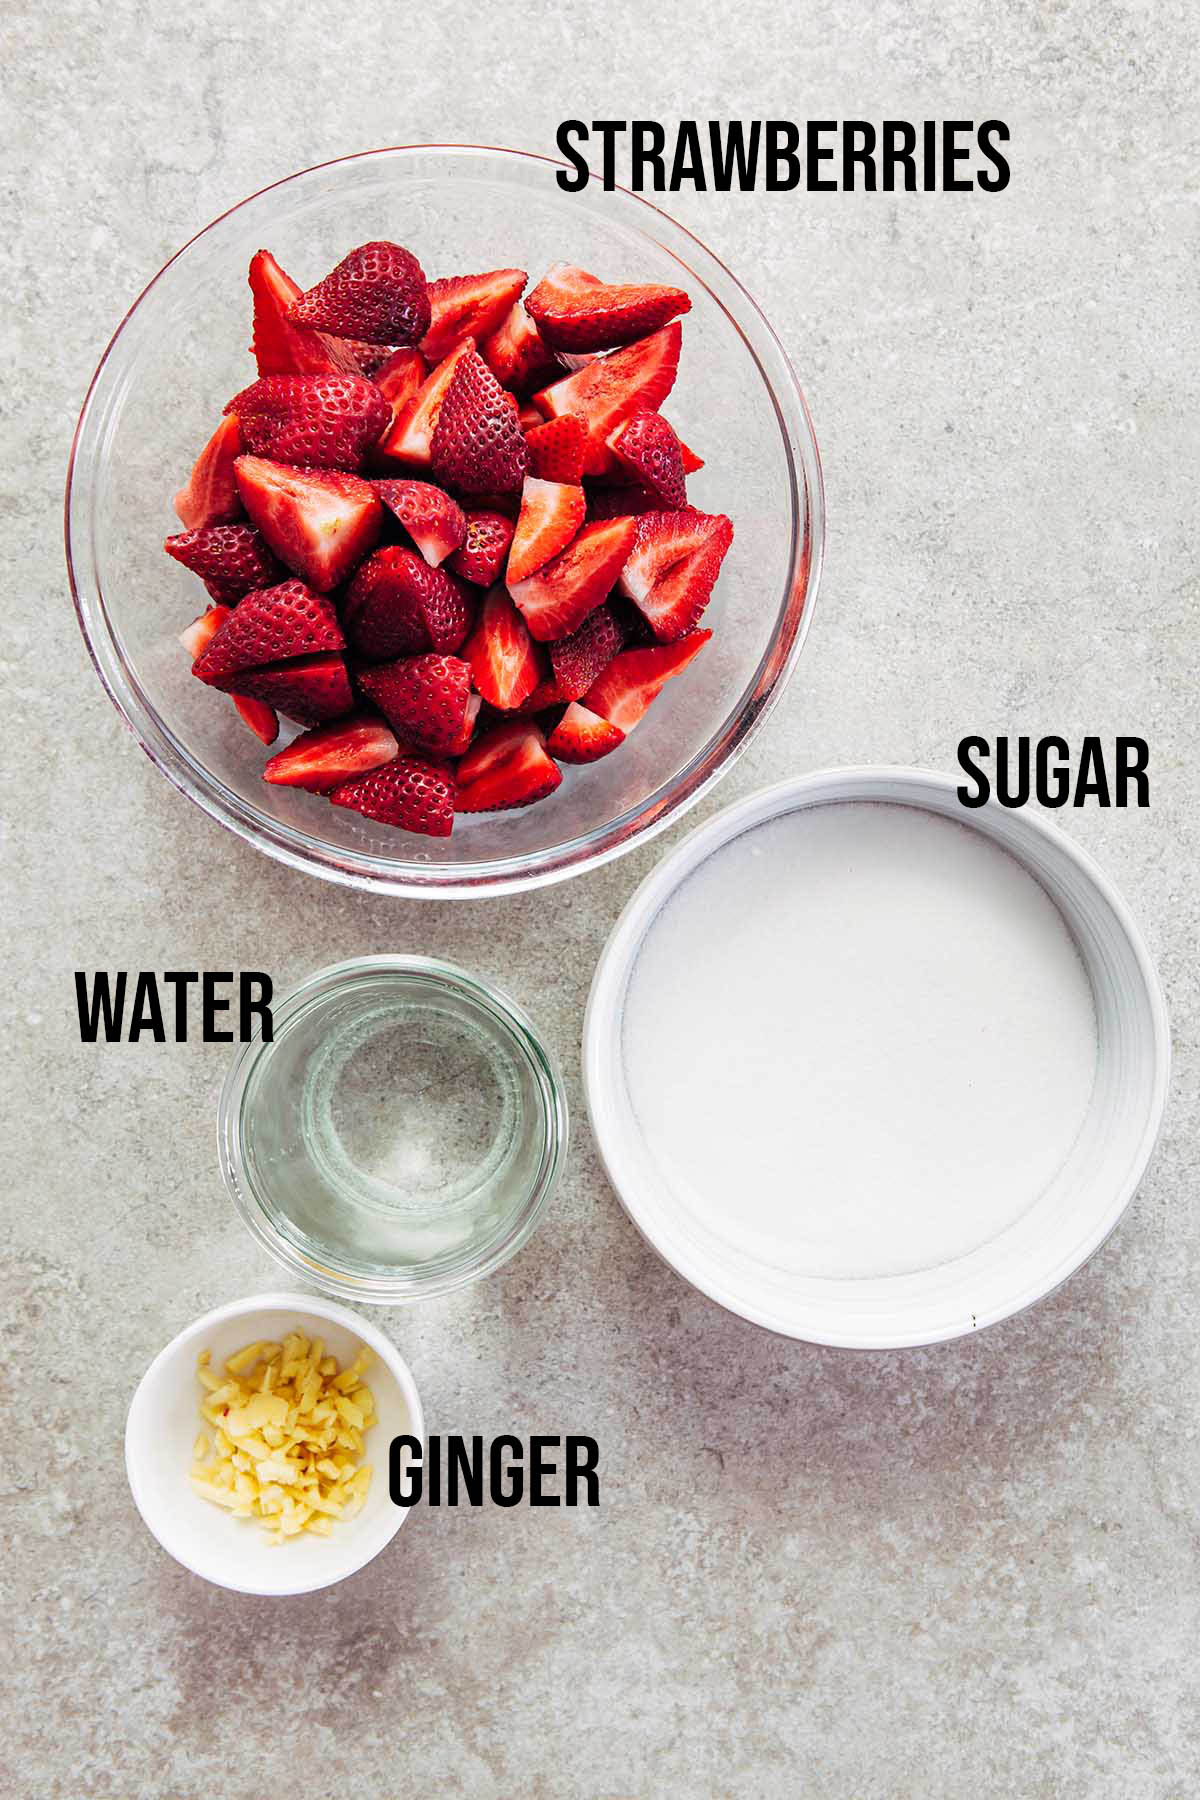 A bowl of quartered strawberries, a bowl of sugar, a jar of water, and a small bowl of minced ginger shot from overhead on a stone surface.